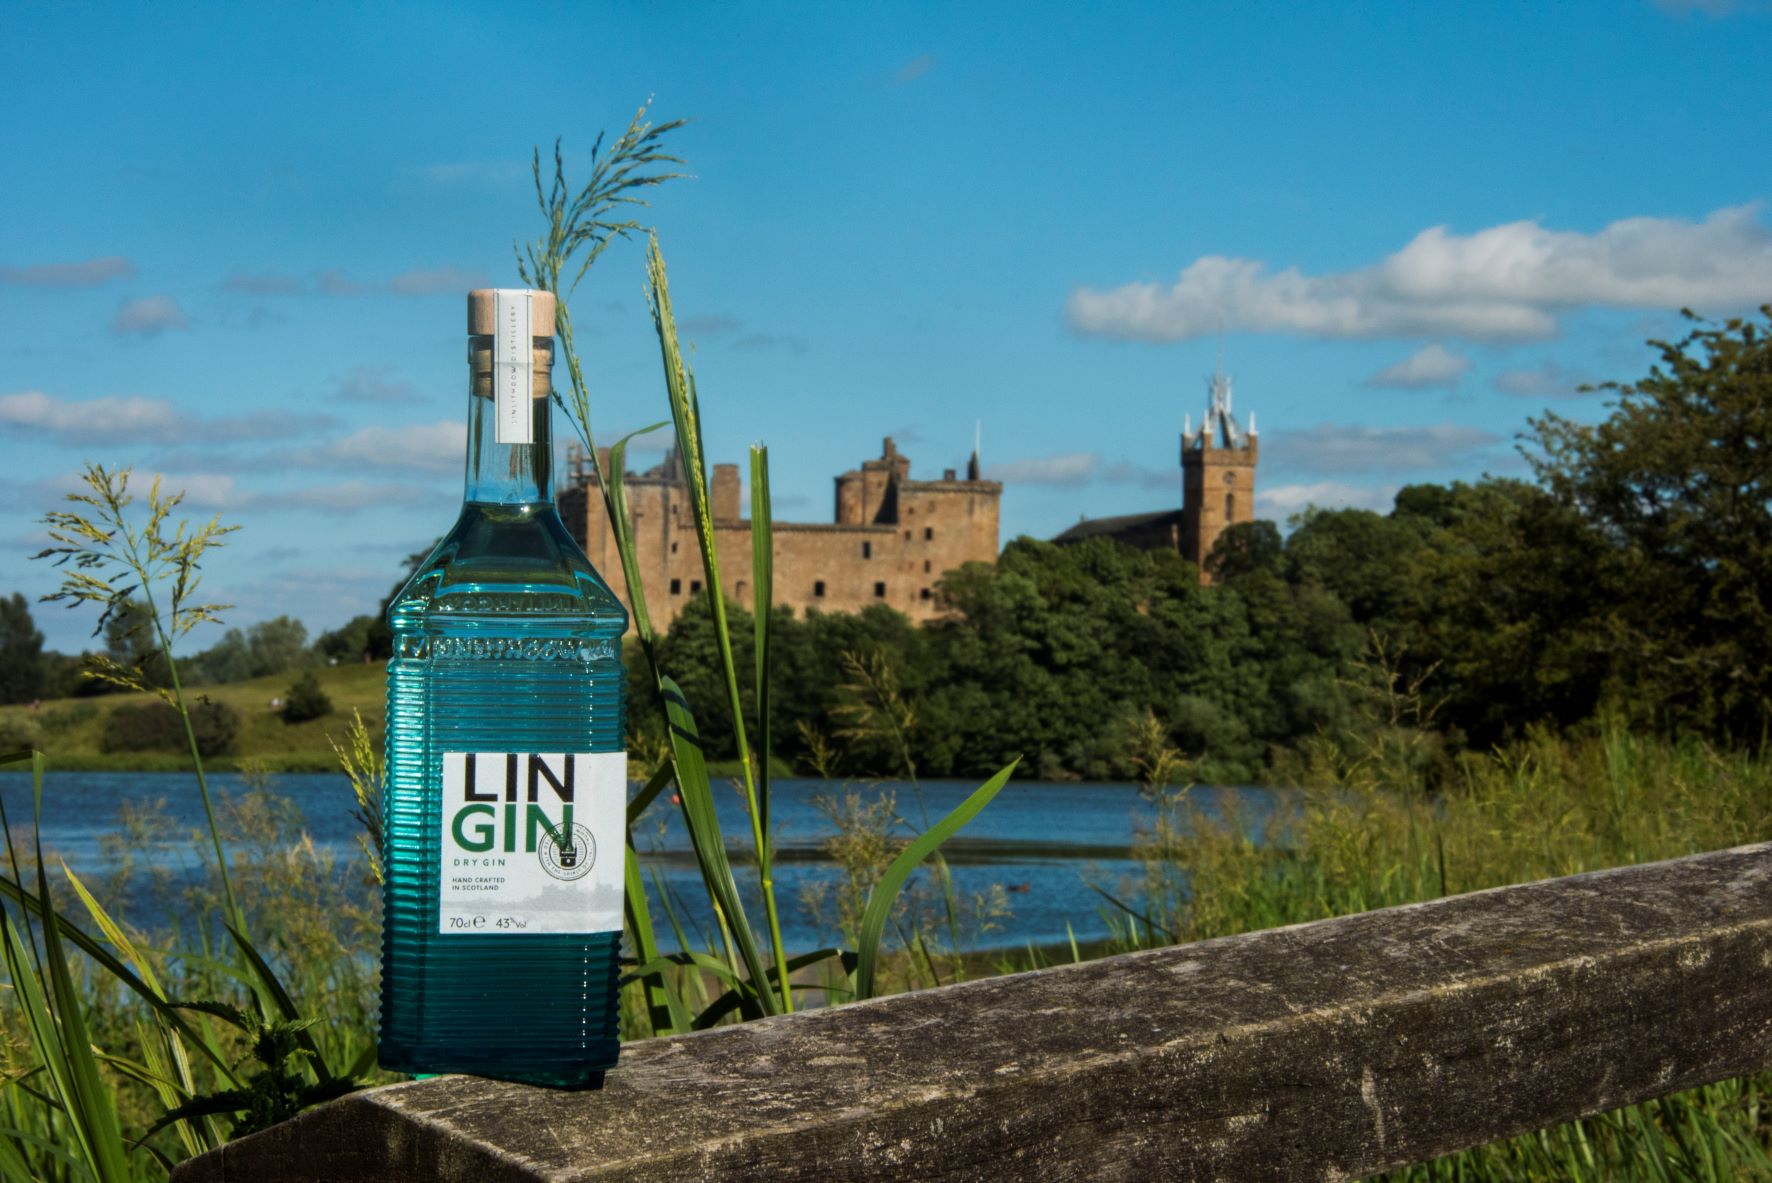 Lin Gin and Linlithgow Palace